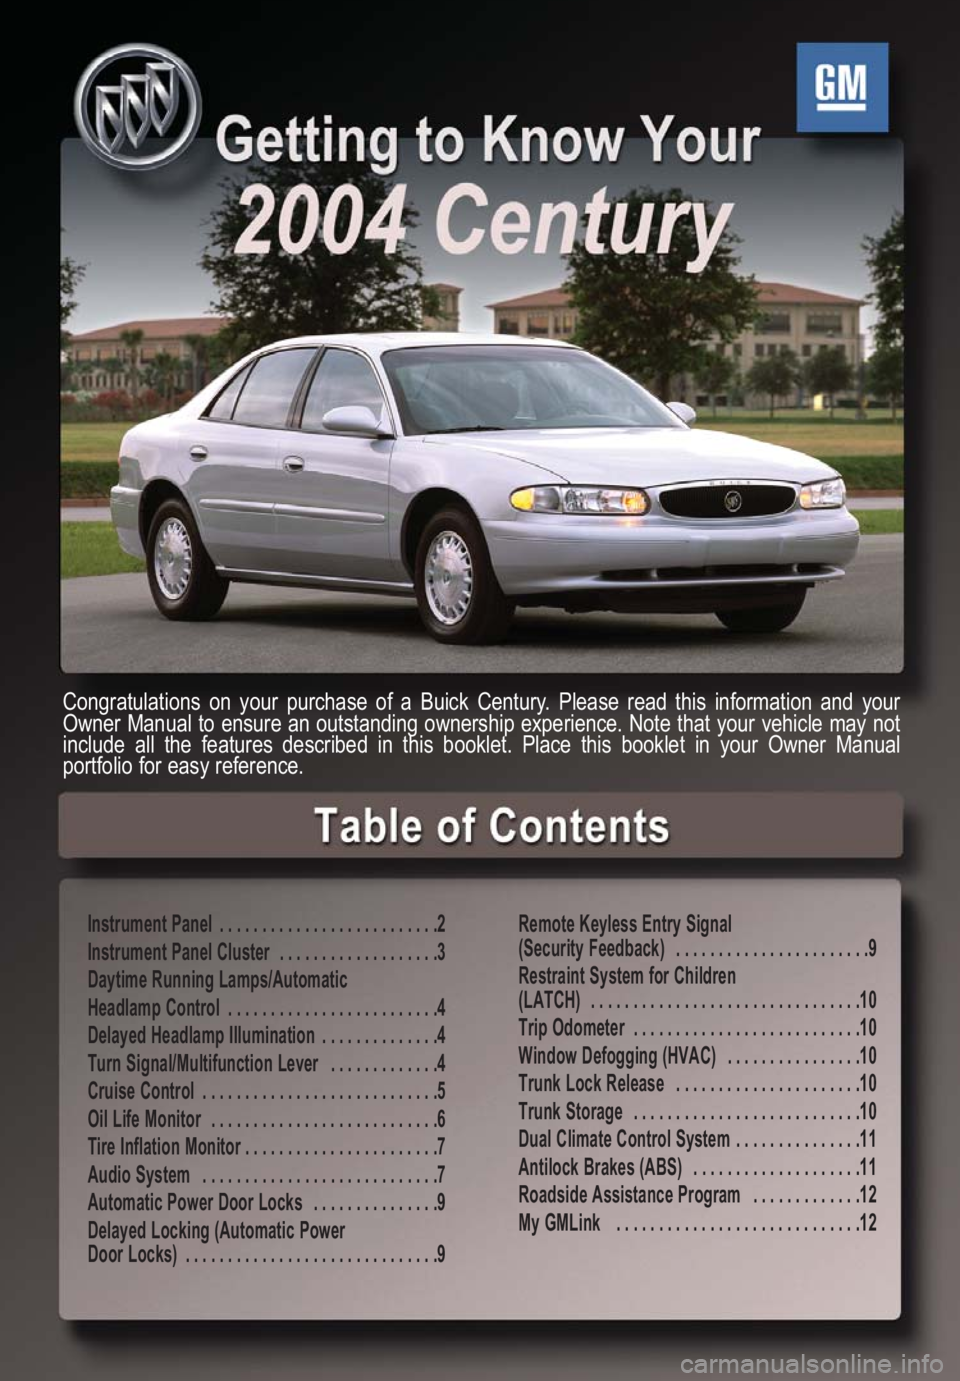 BUICK CENTURY 2004  Get To Know Guide Instrument Panel  . . . . . . . . . . . . . . . . . . . . . . . . . .2
Instrument Panel Cluster  . . . . . . . . . . . . . . . . . . .3
Daytime Running Lamps/Automatic 
Headlamp Control  . . . . . . .